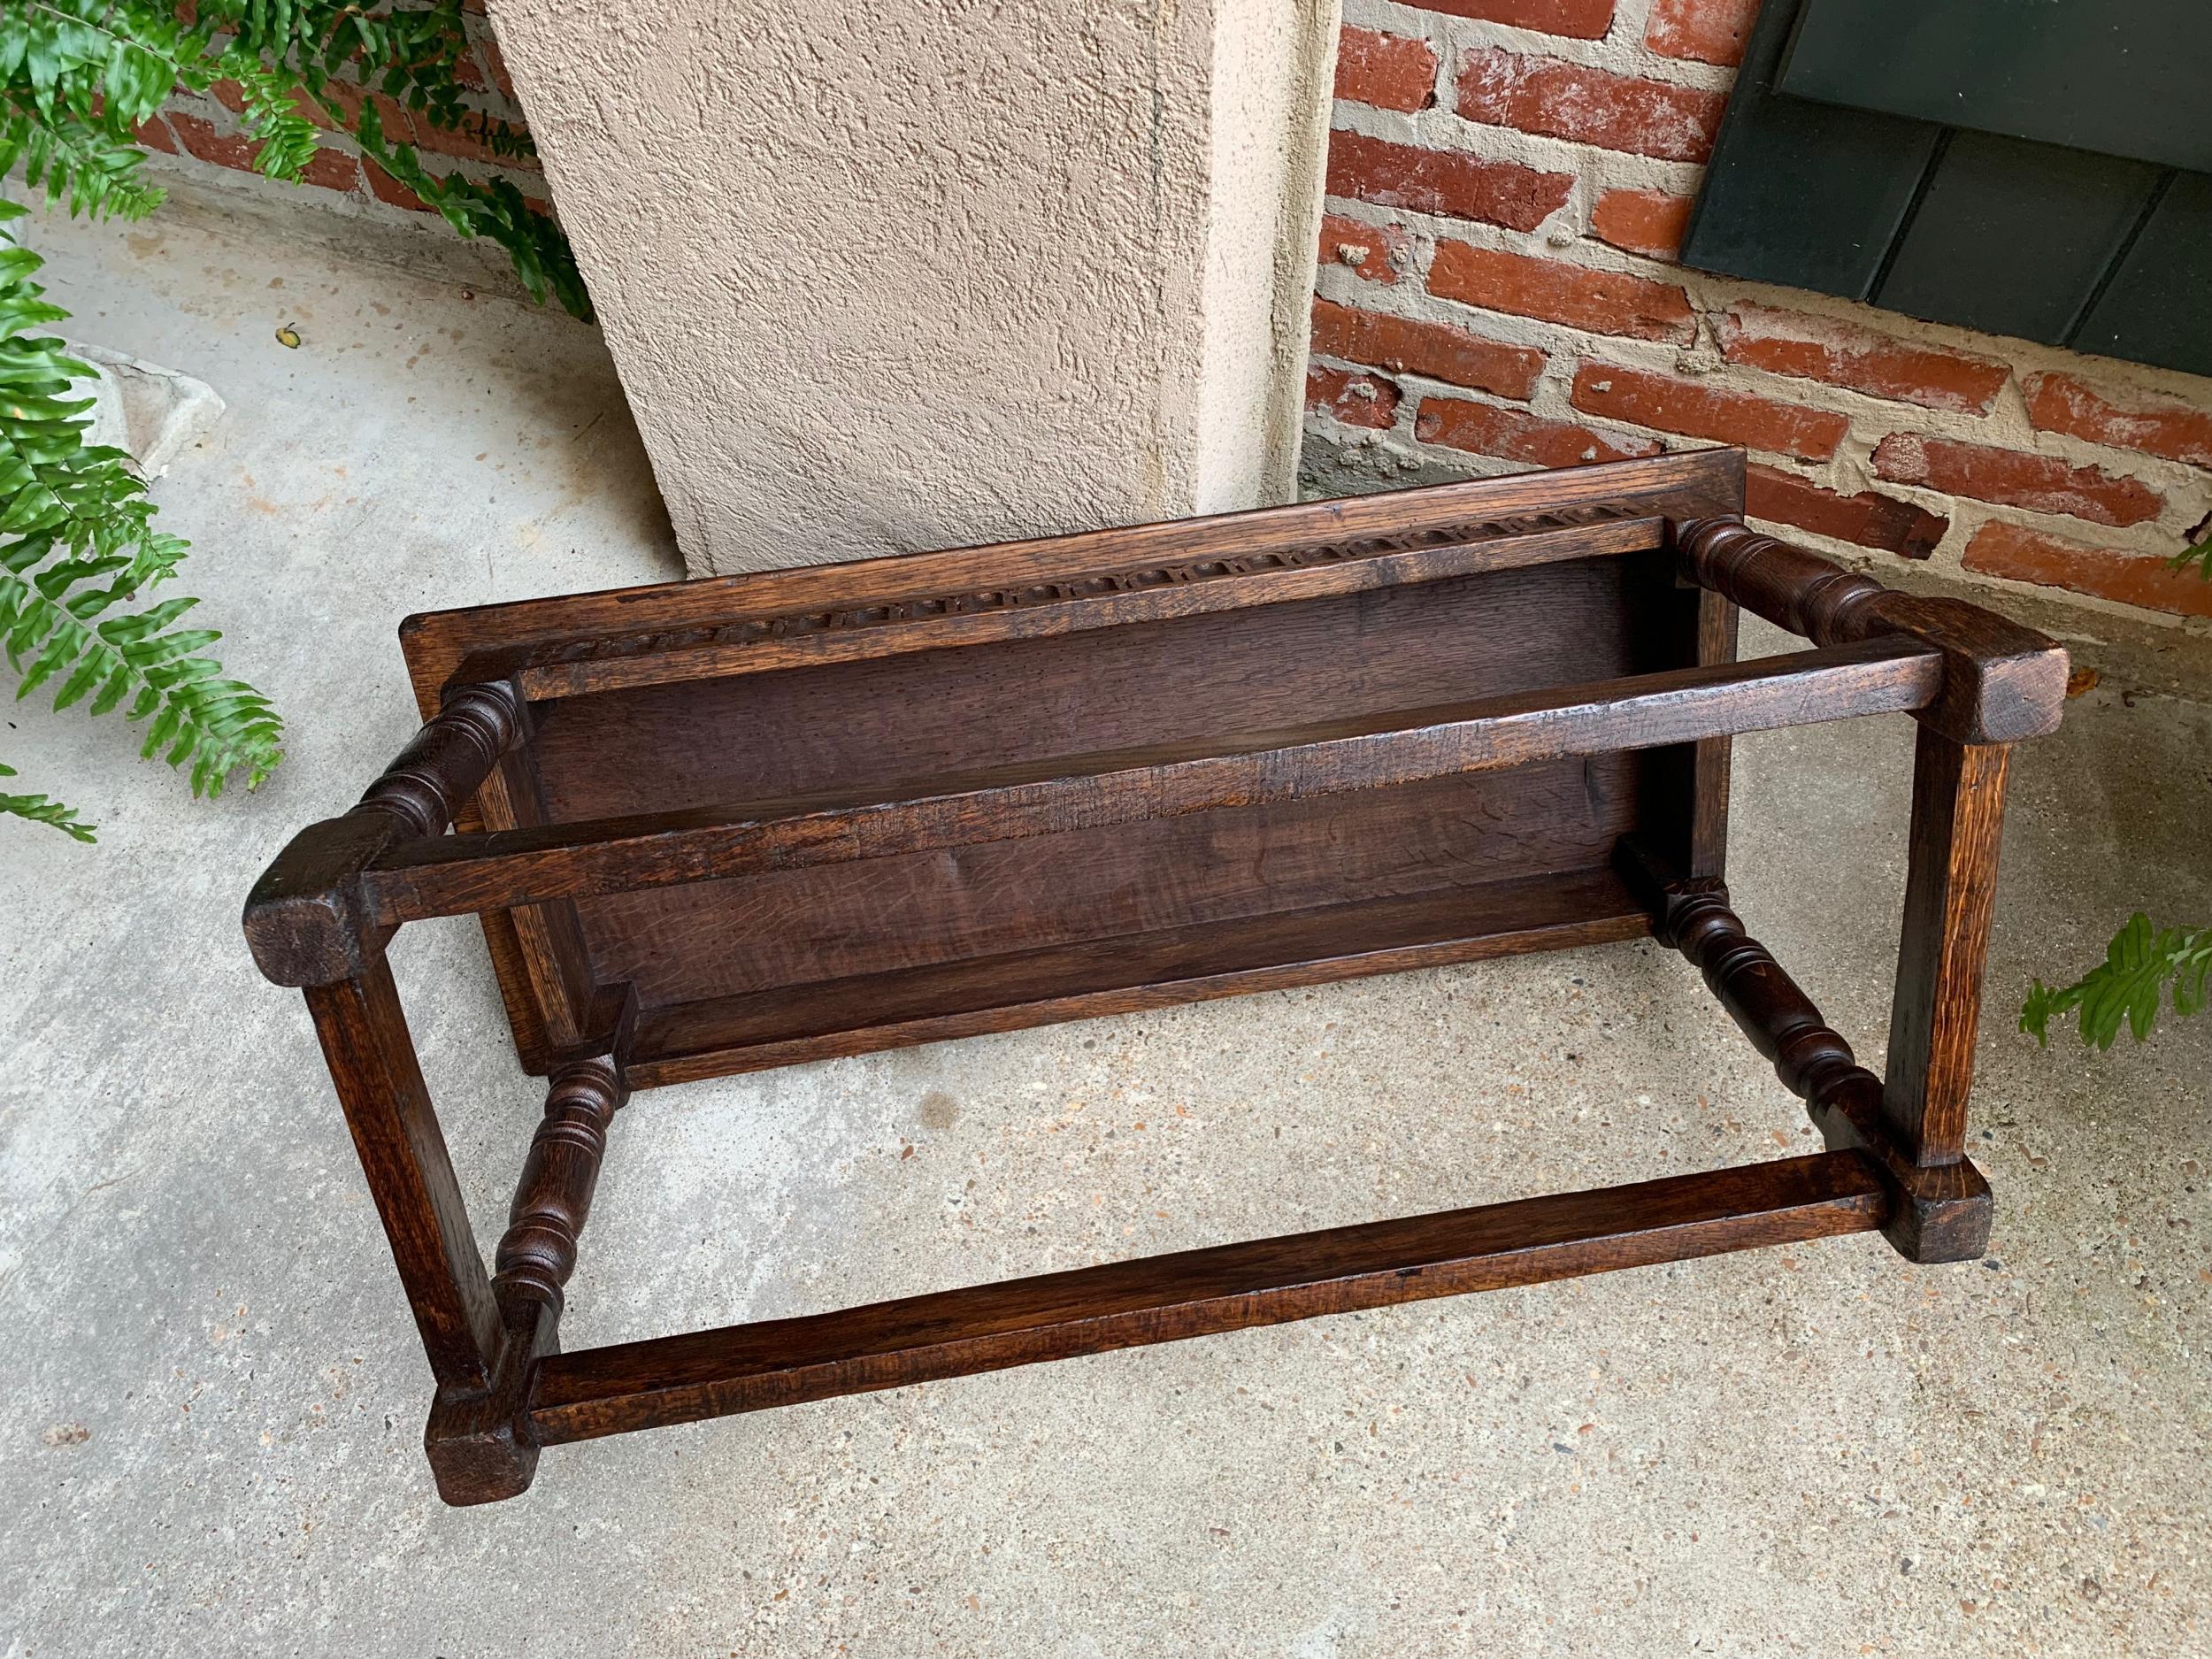 Antique English Carved Oak Pegged Joint Stool Duet Bench Window Seat, c1900 5